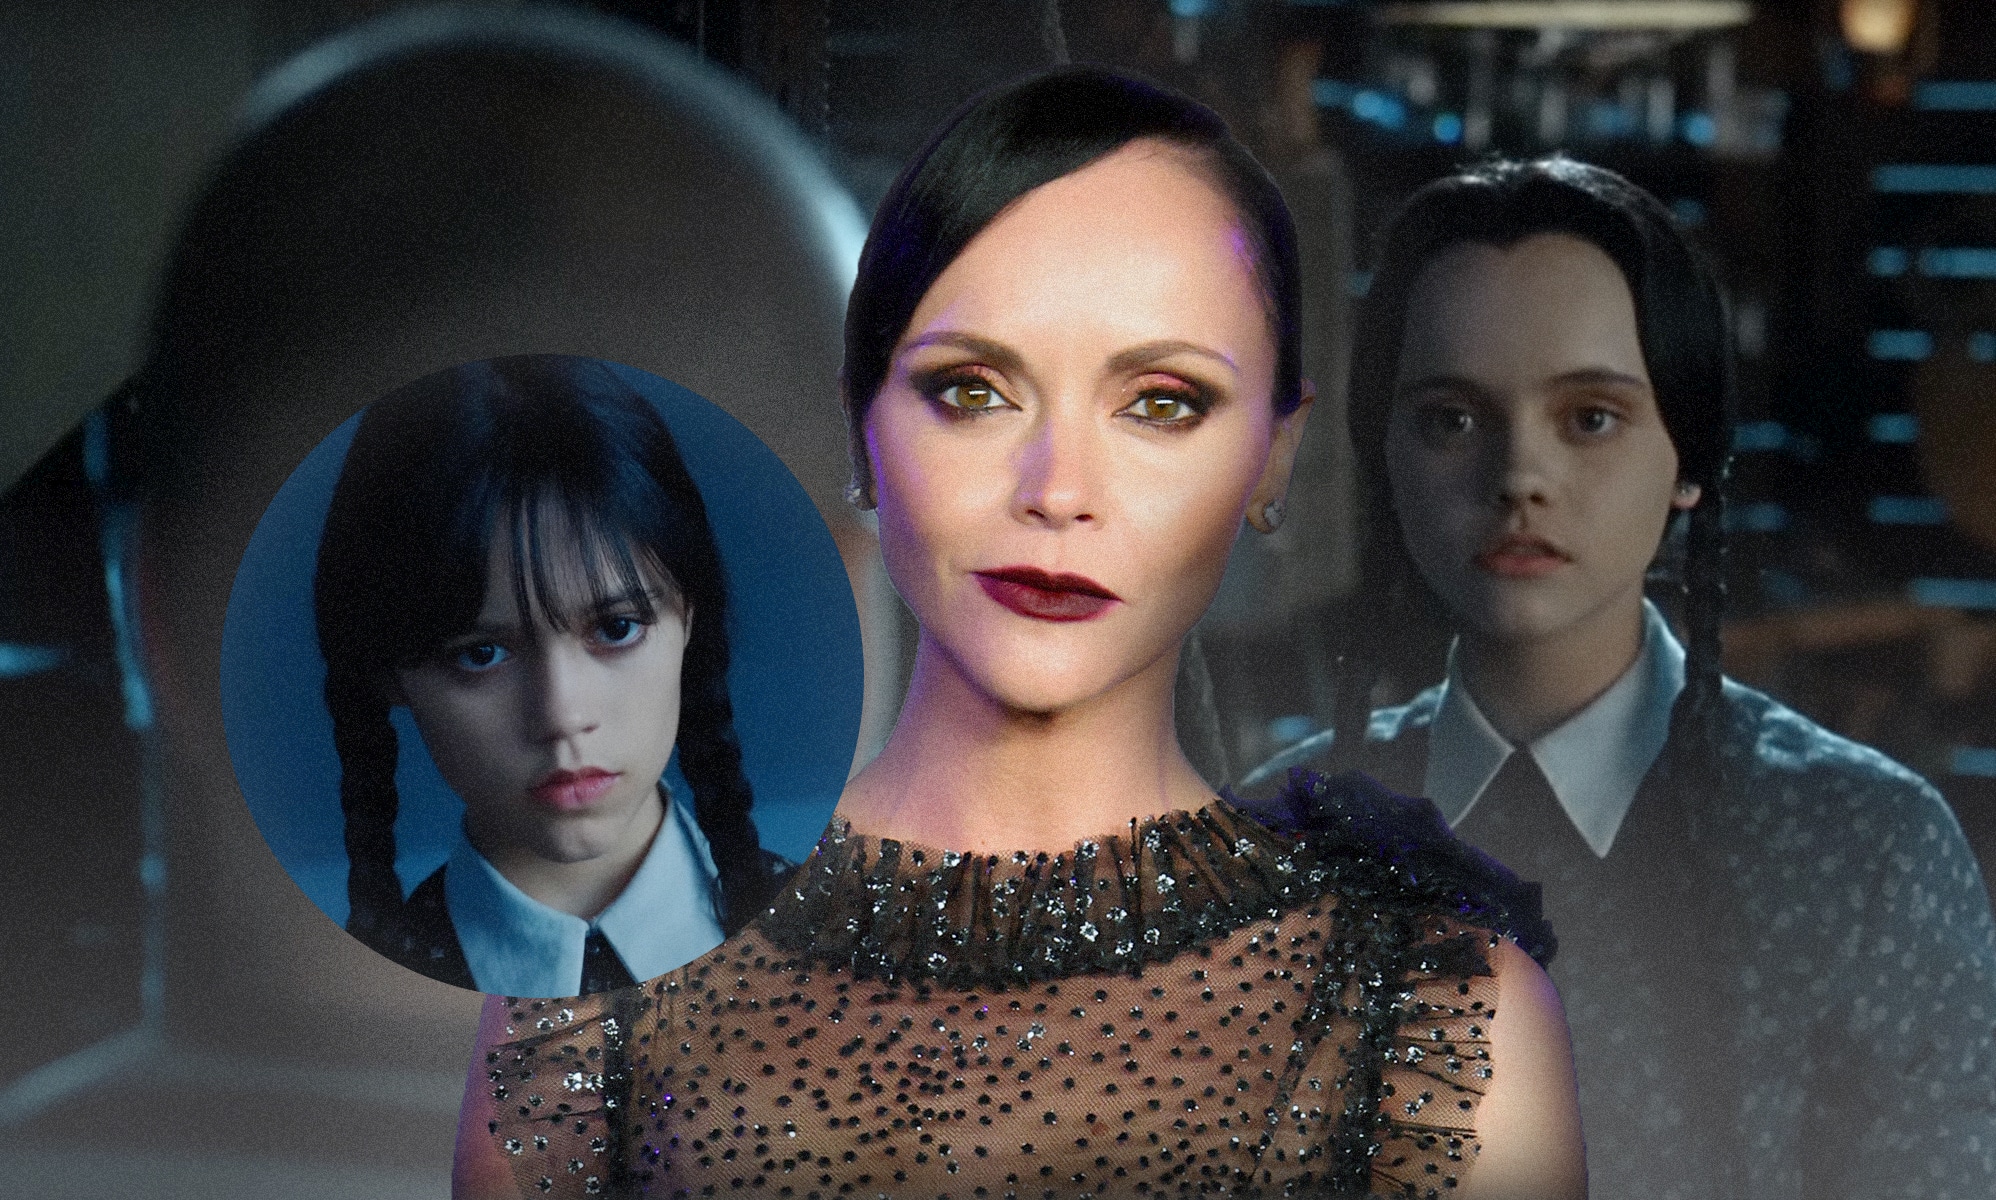 Christina Ricci casting in Netflix Wednesday Addams reboot divides fans:  'Nostalgia casting is cheap and lame